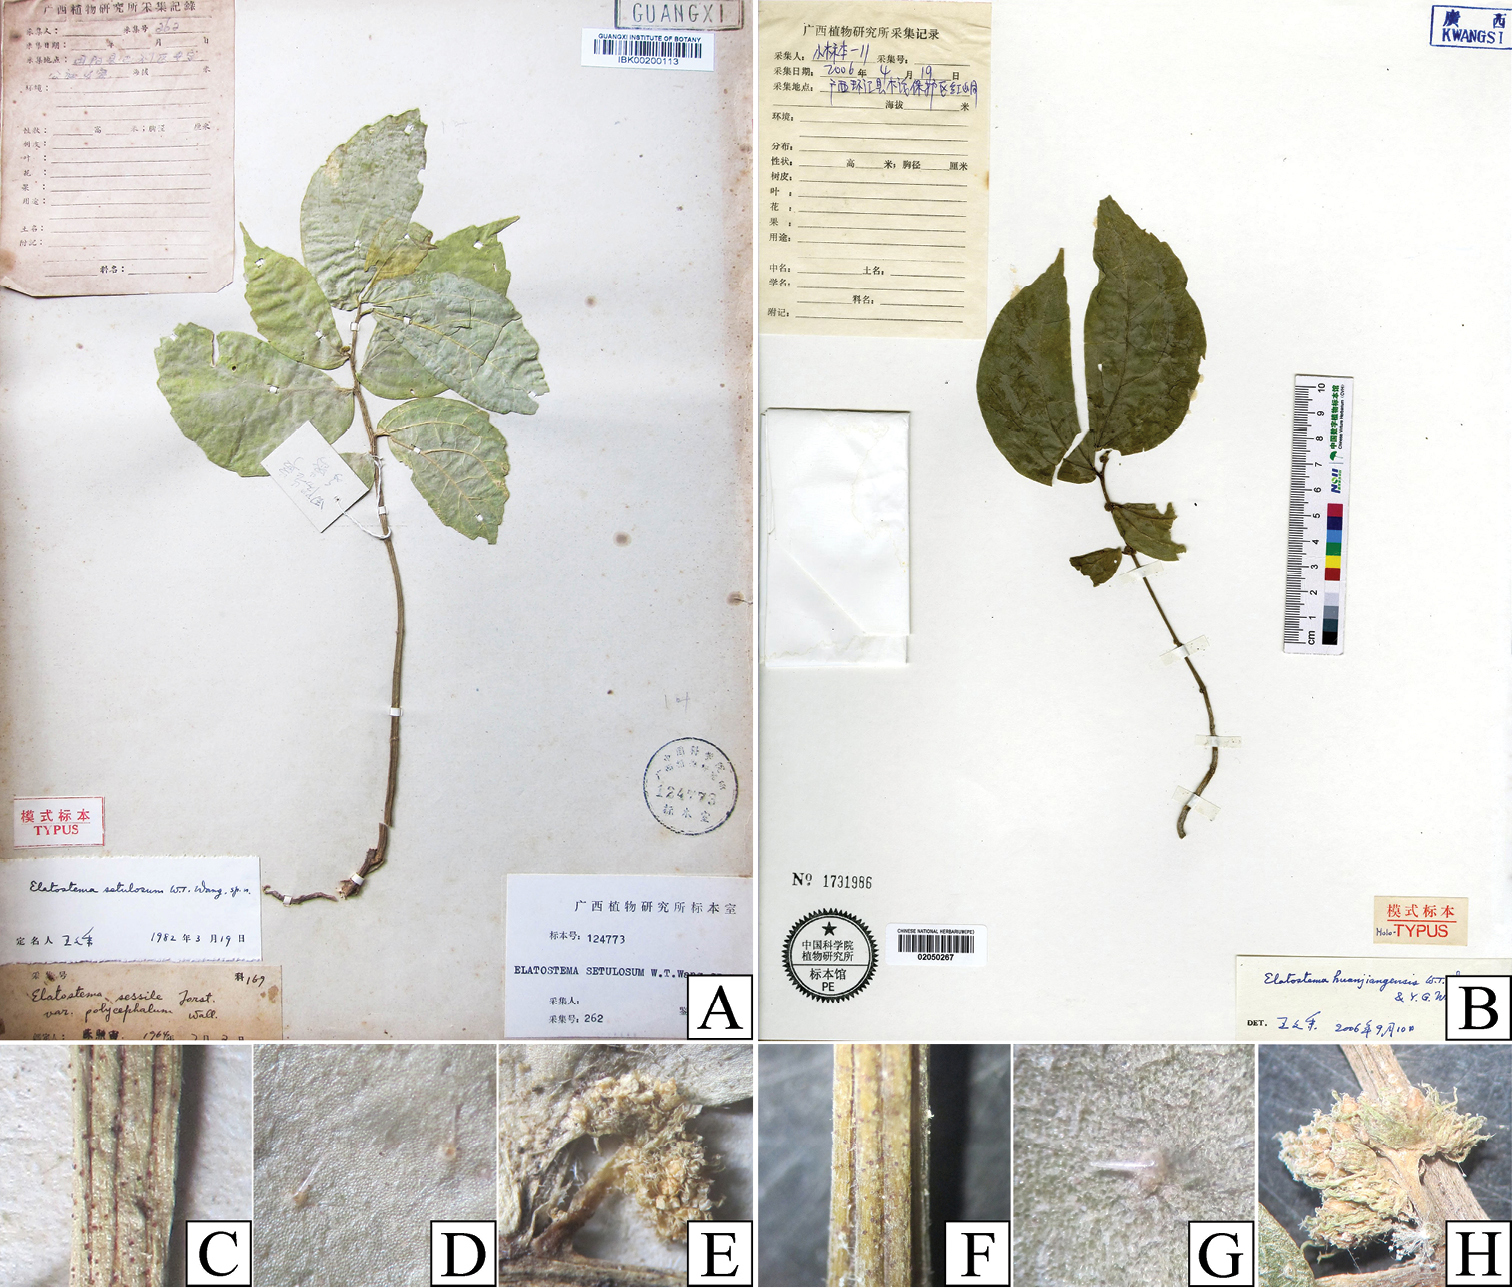 The rediscovery and delimitation of Elatostema setulosum W.T.Wang 